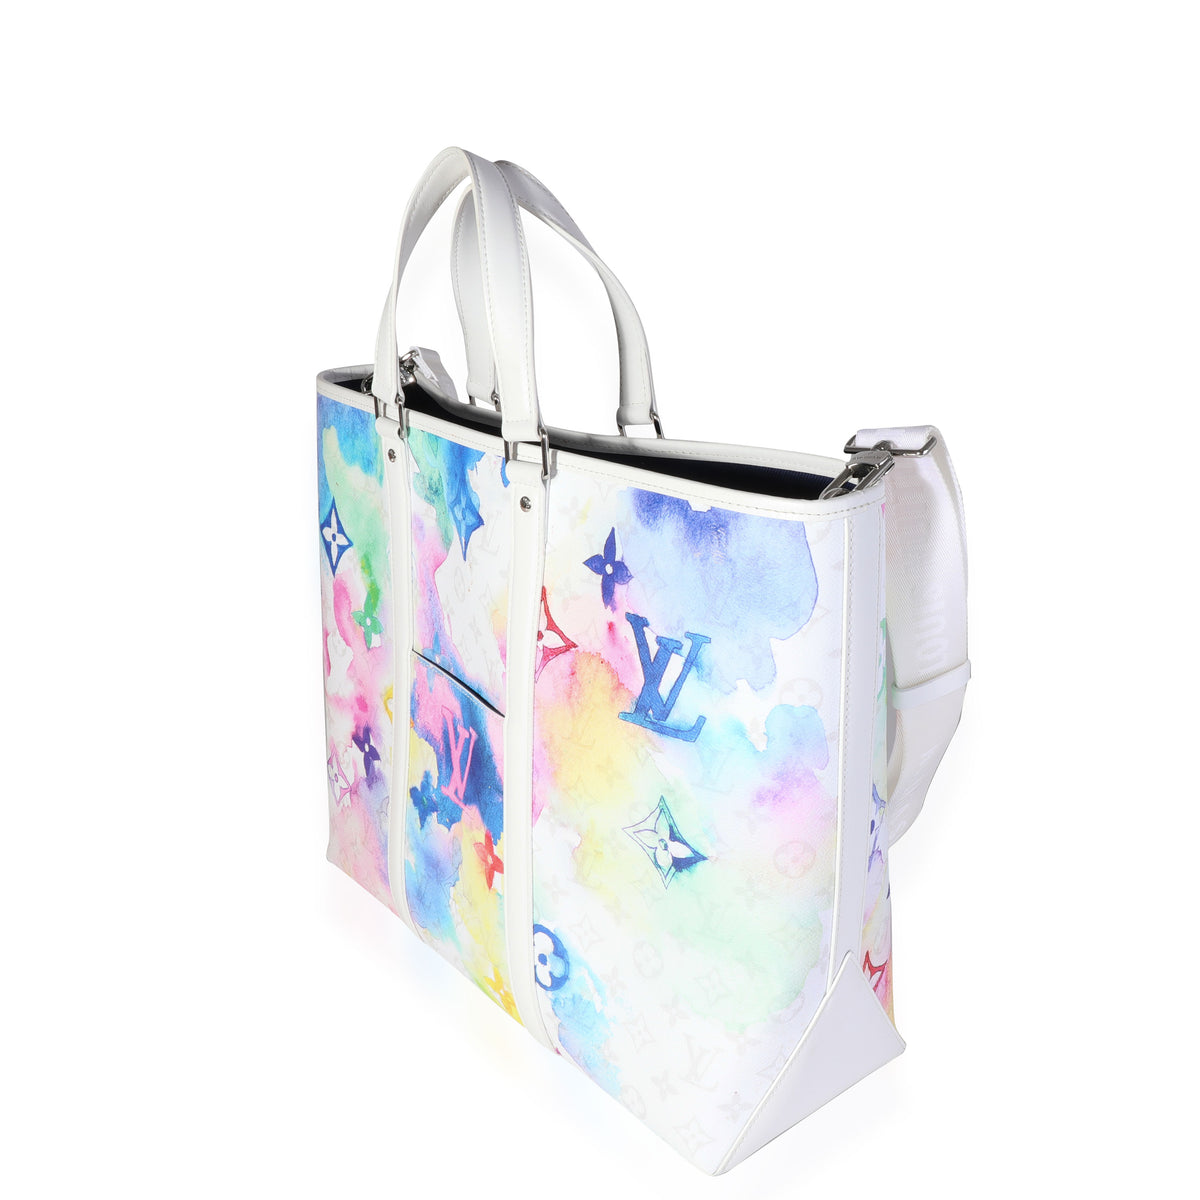 Louis Vuitton New Tote GM watercolor collection 